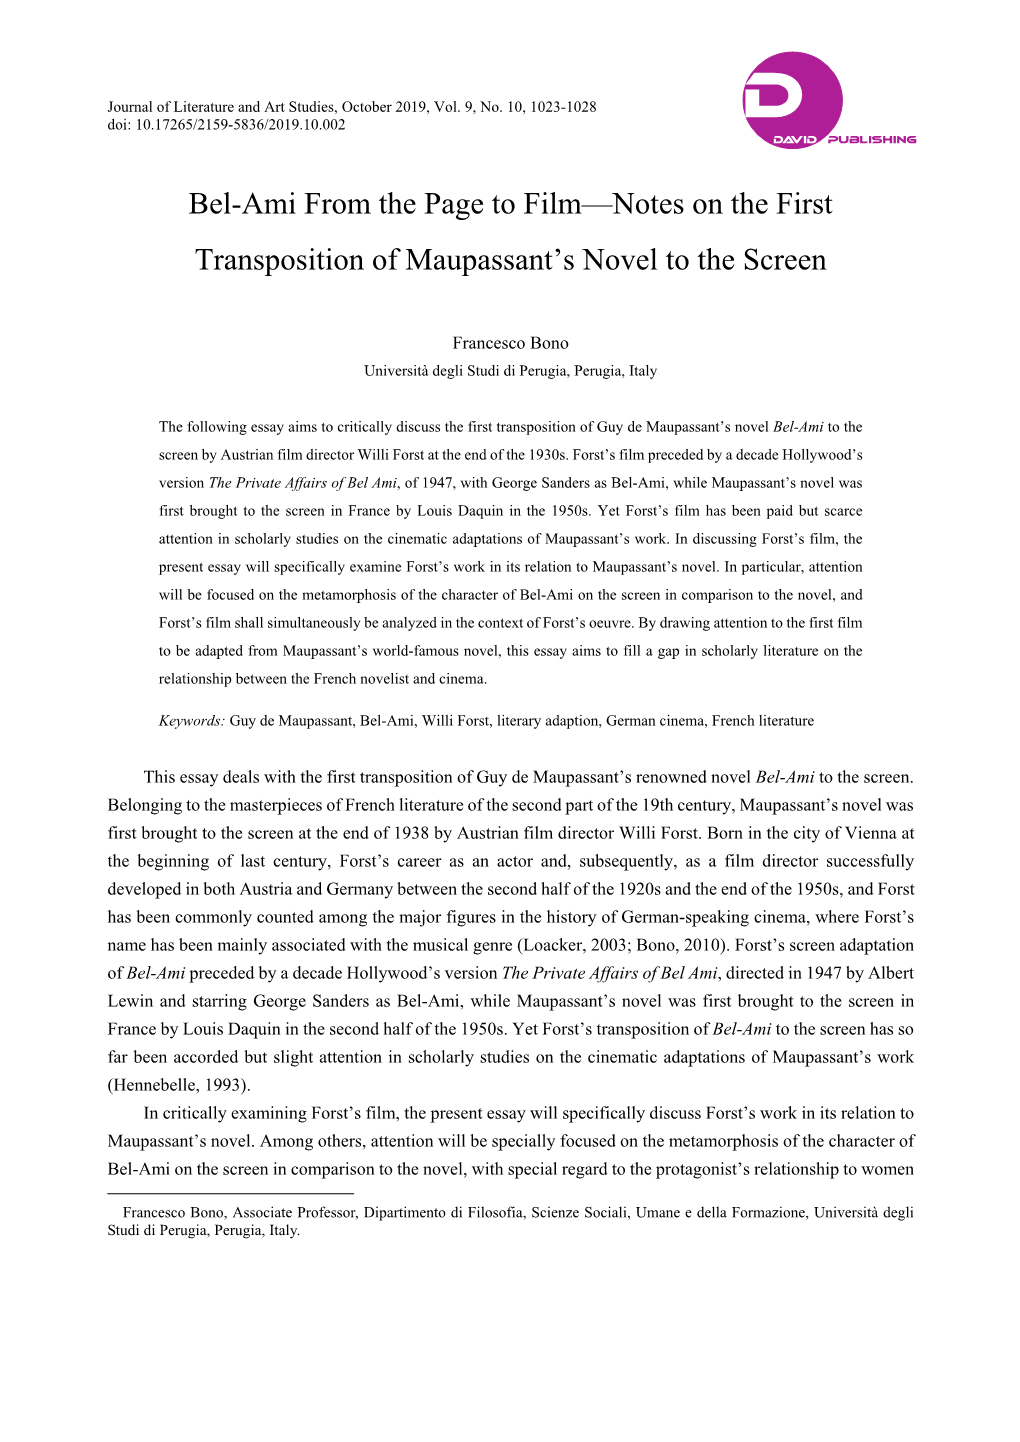 Bel-Ami from the Page to Film—Notes on the First Transposition of Maupassant’S Novel to the Screen